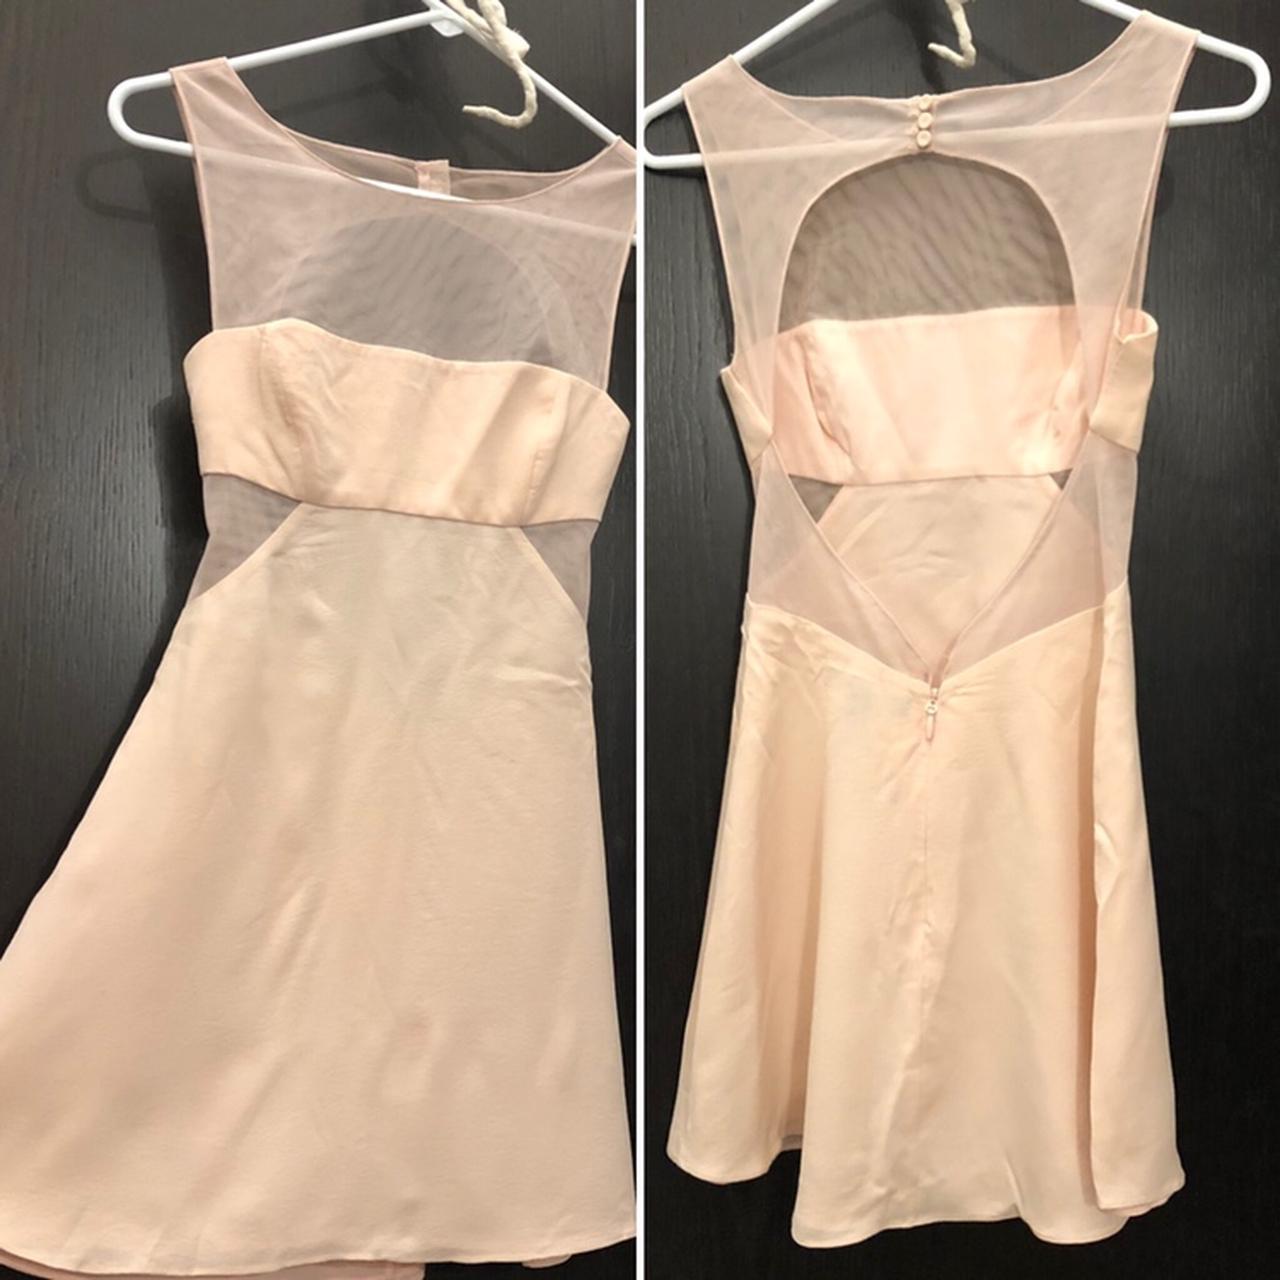 Reformation Women's Pink and Cream Dress